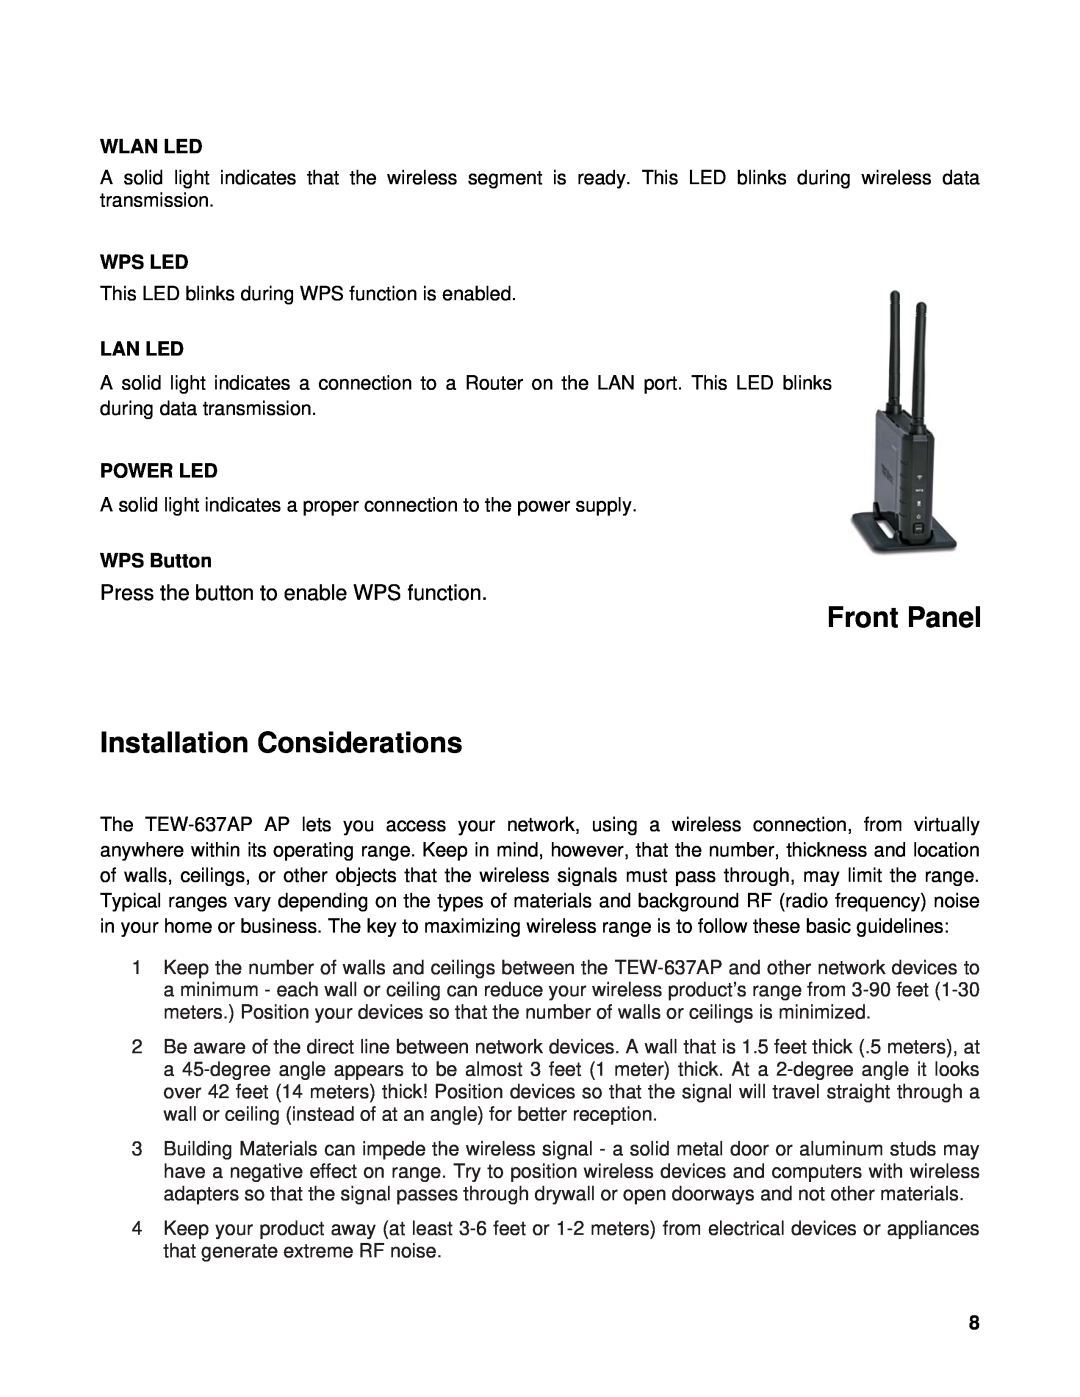 TRENDnet TEW-637AP manual Front Panel Installation Considerations, Press the button to enable WPS function 